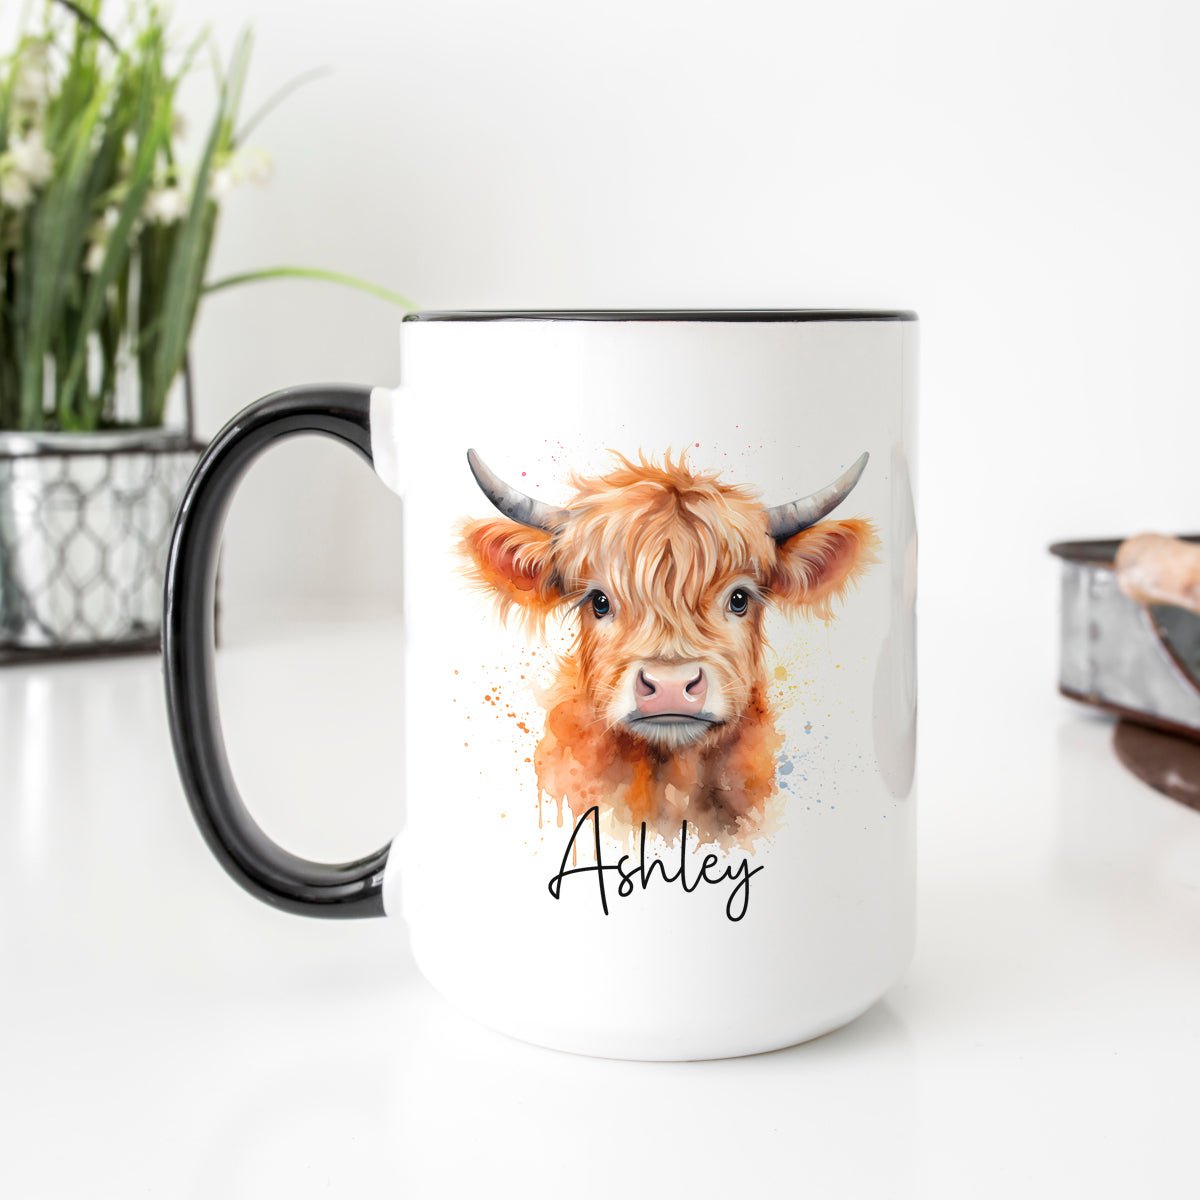 https://cdn.shopify.com/s/files/1/0522/5532/6403/products/personalized-highland-cow-face-mug-324557_2048x.jpg?v=1698518398